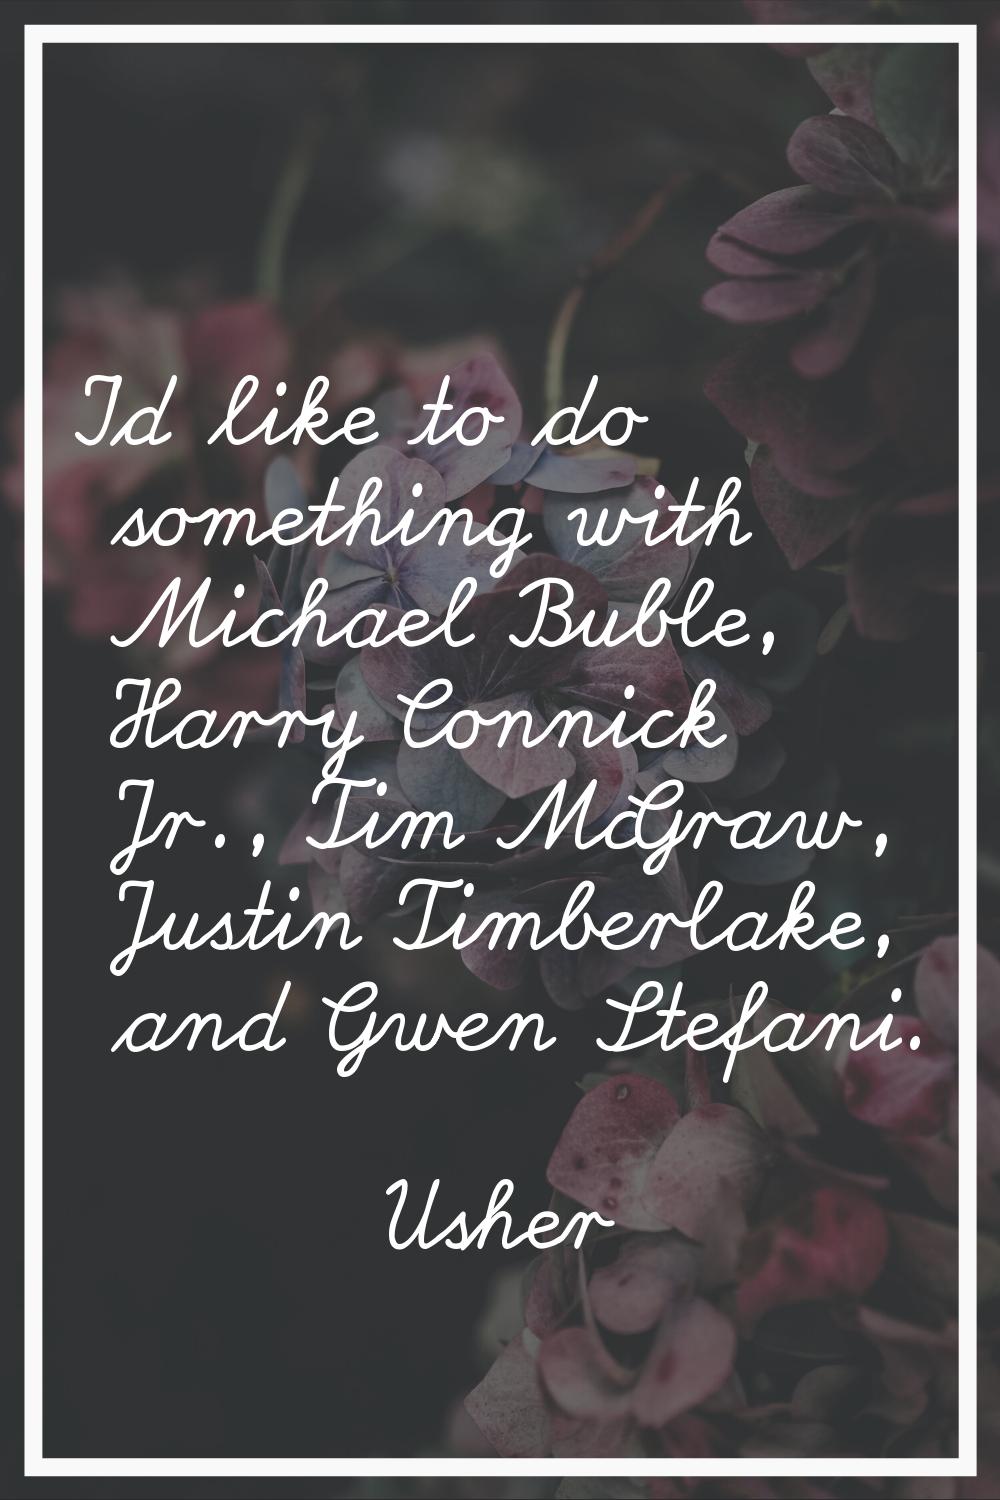 I'd like to do something with Michael Buble, Harry Connick Jr., Tim McGraw, Justin Timberlake, and 